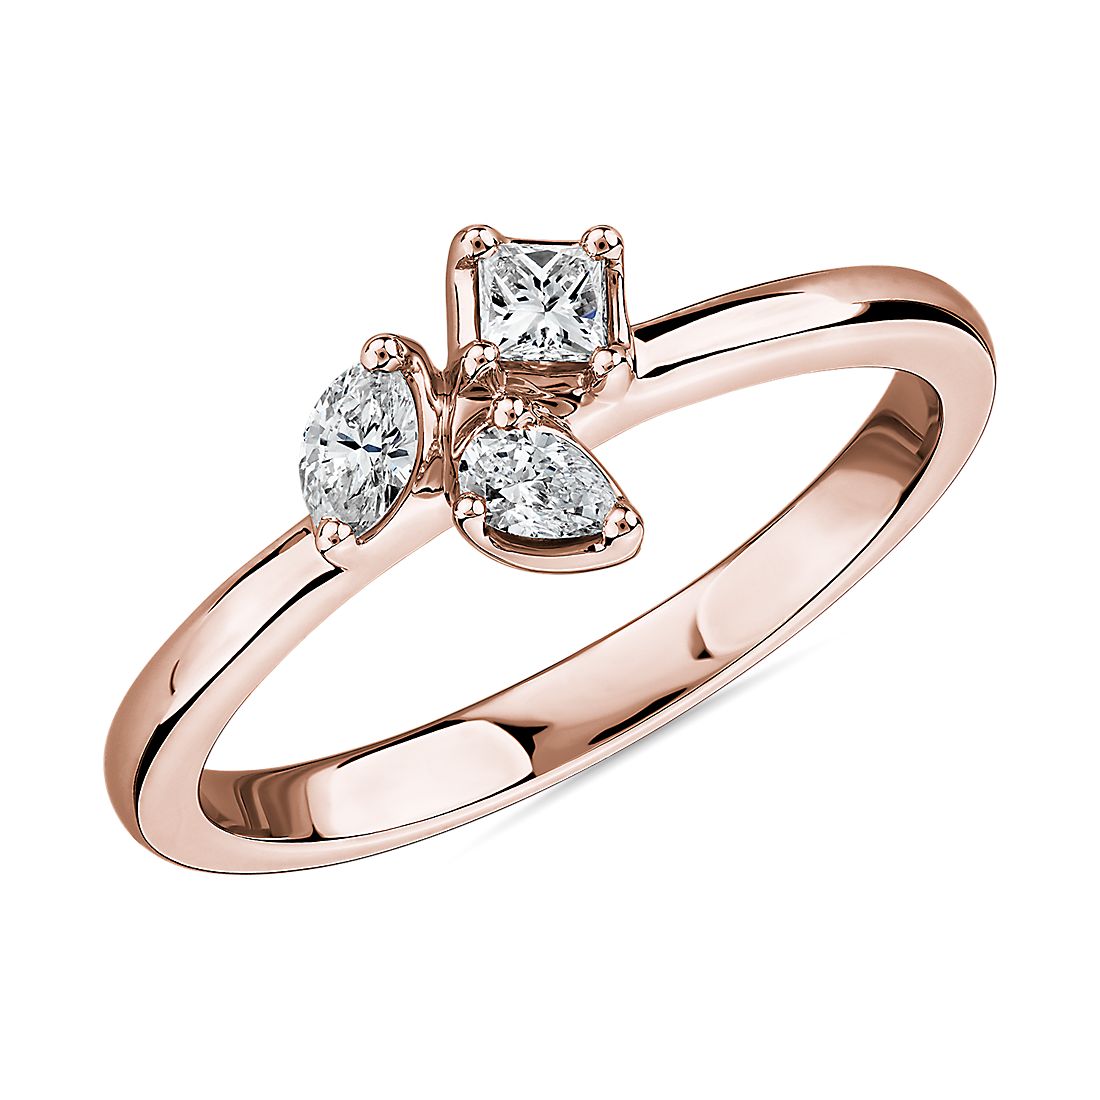 Mixed Shape Diamond Cluster Fashion Ring in 14k Rose Gold (1/4 ct. tw.)